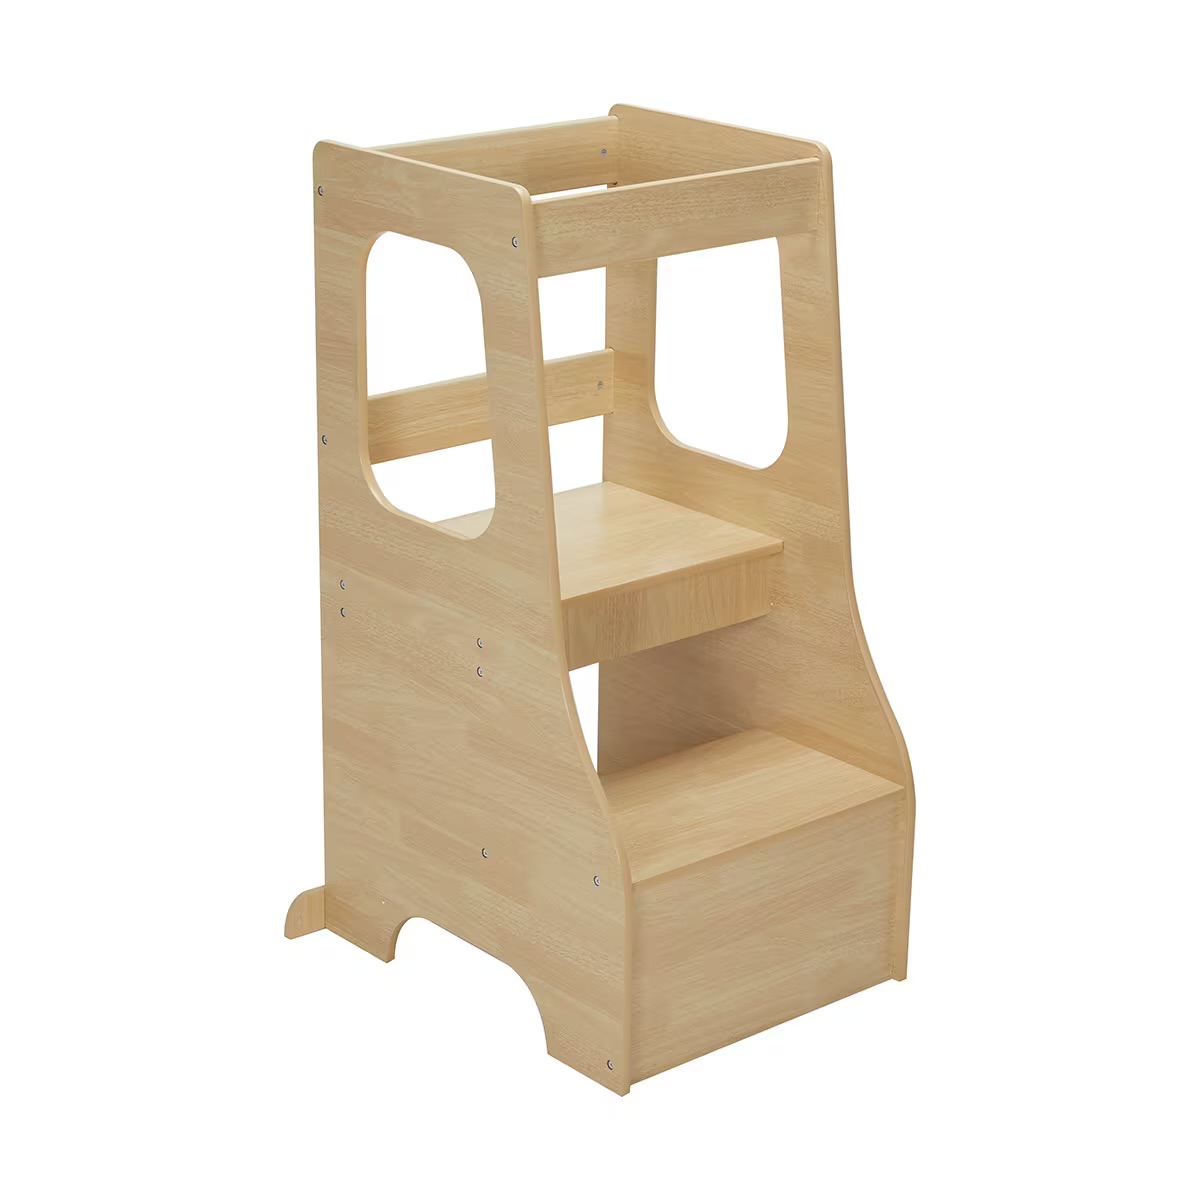 Kmart “stand up stool”